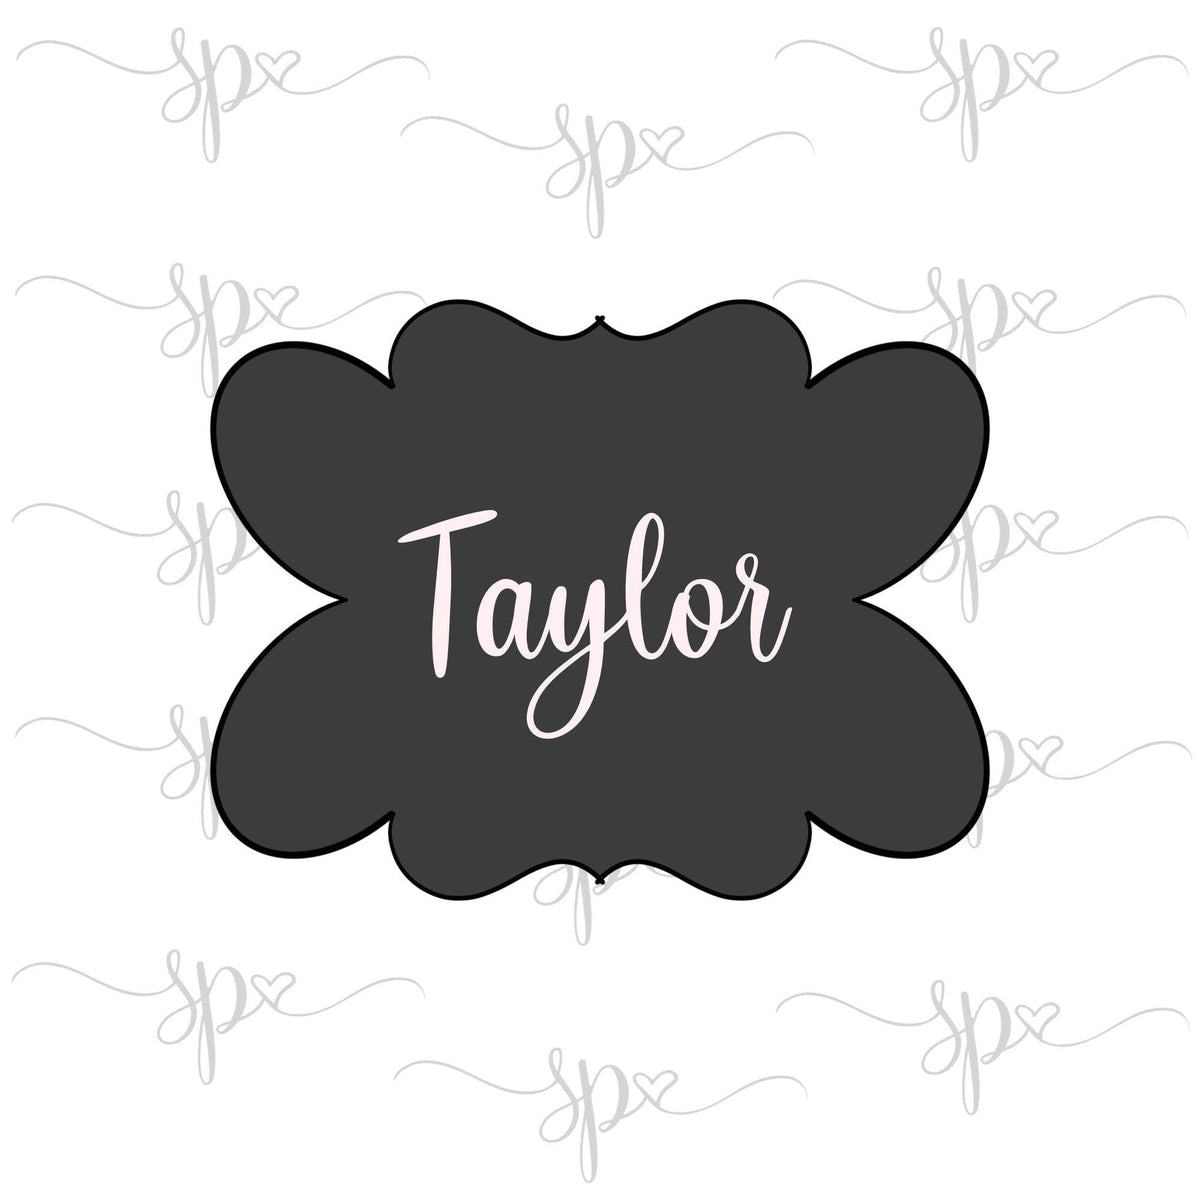 Taylor Plaque Cookie Cutter - Sweetleigh 